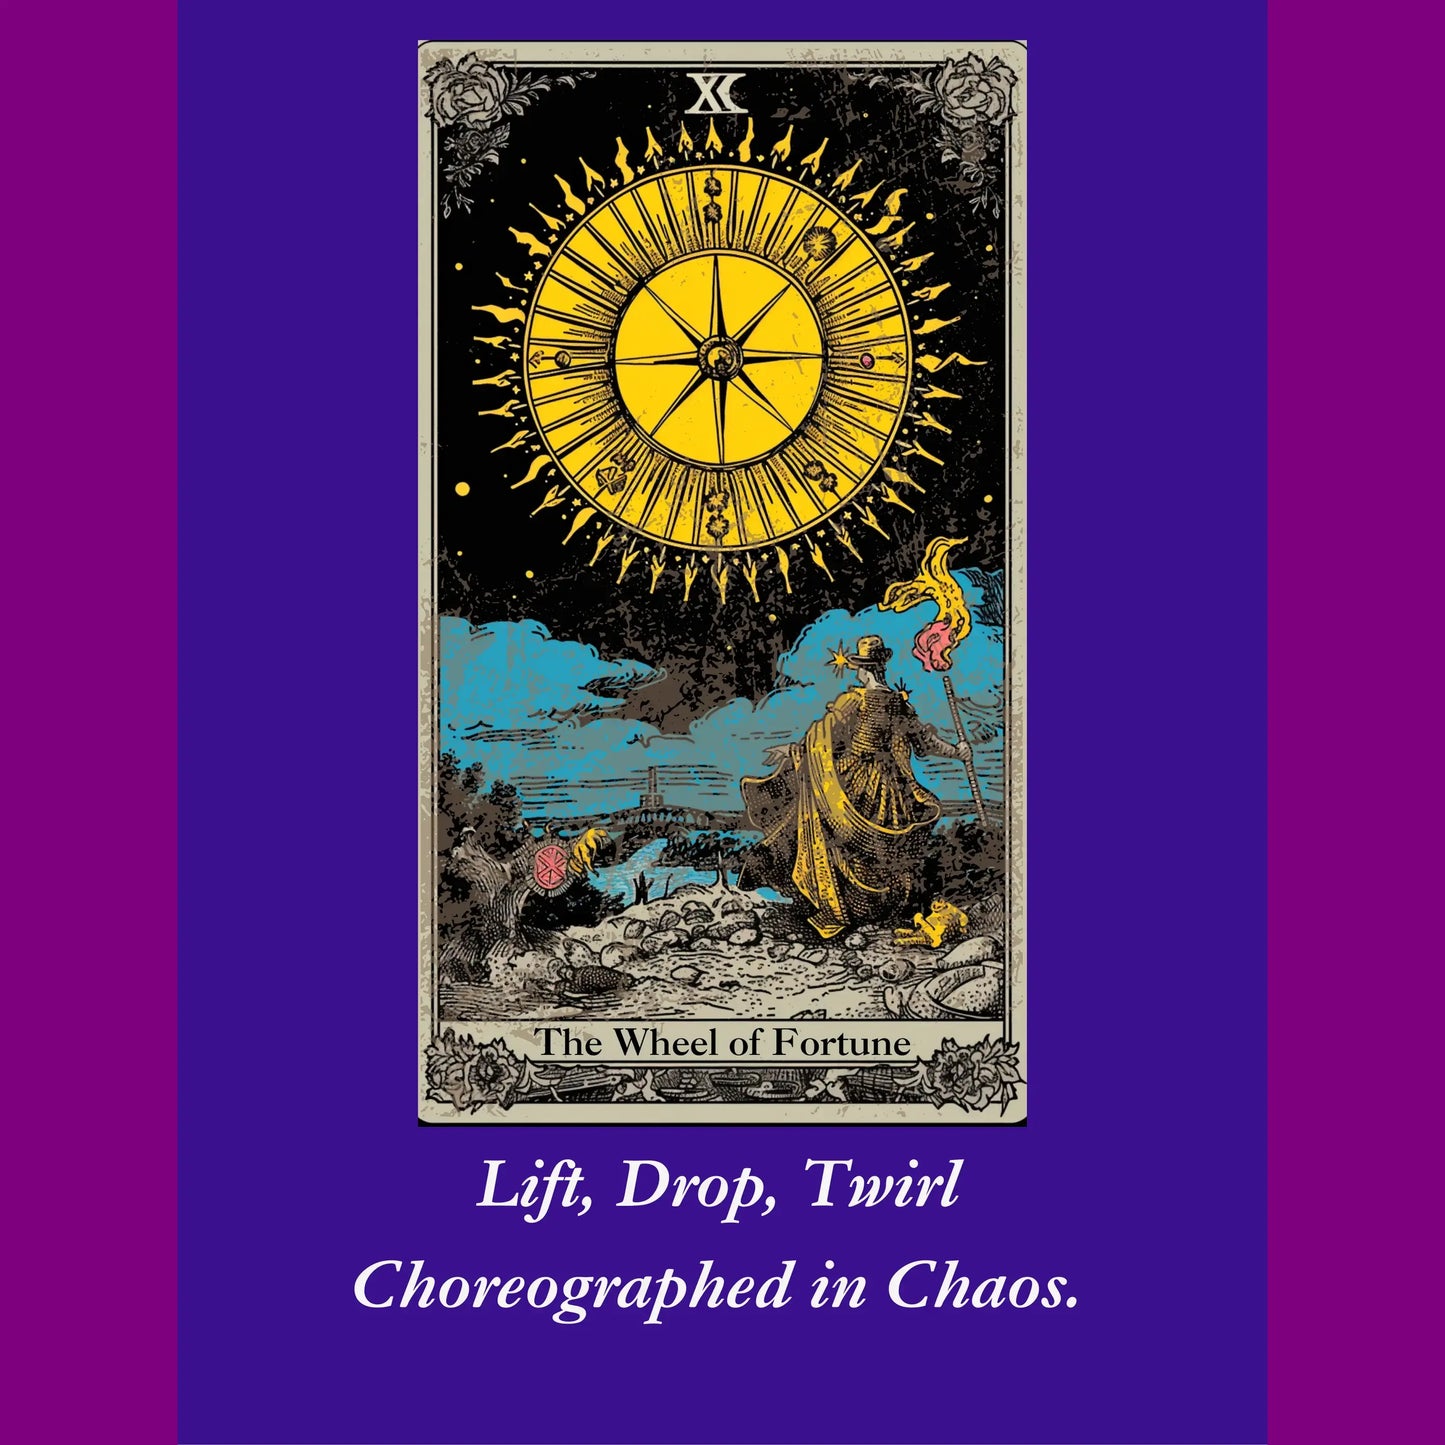 Lift drop twirl choreographed in chaos wheel of Fortune graphic design from BLK Moon Shop.